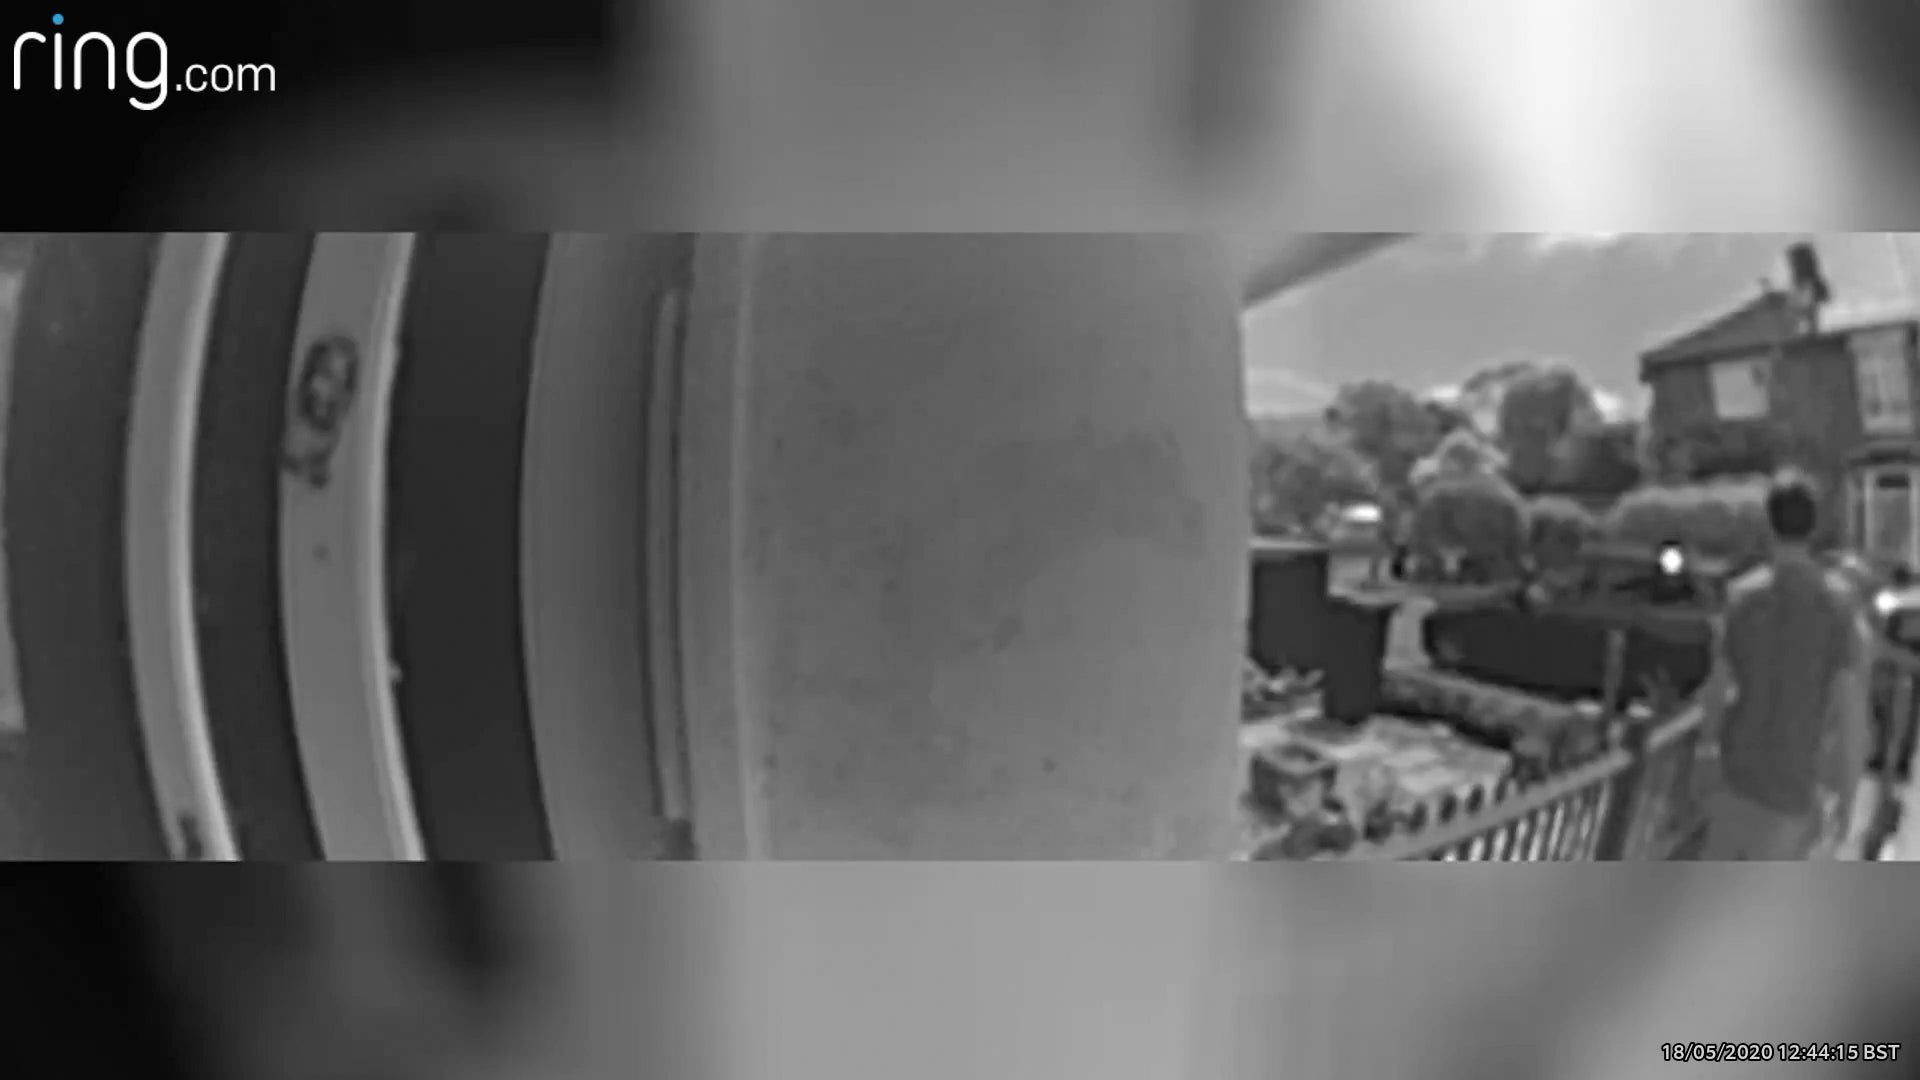 Ring Video Doorbell 3 Plus black and white footage